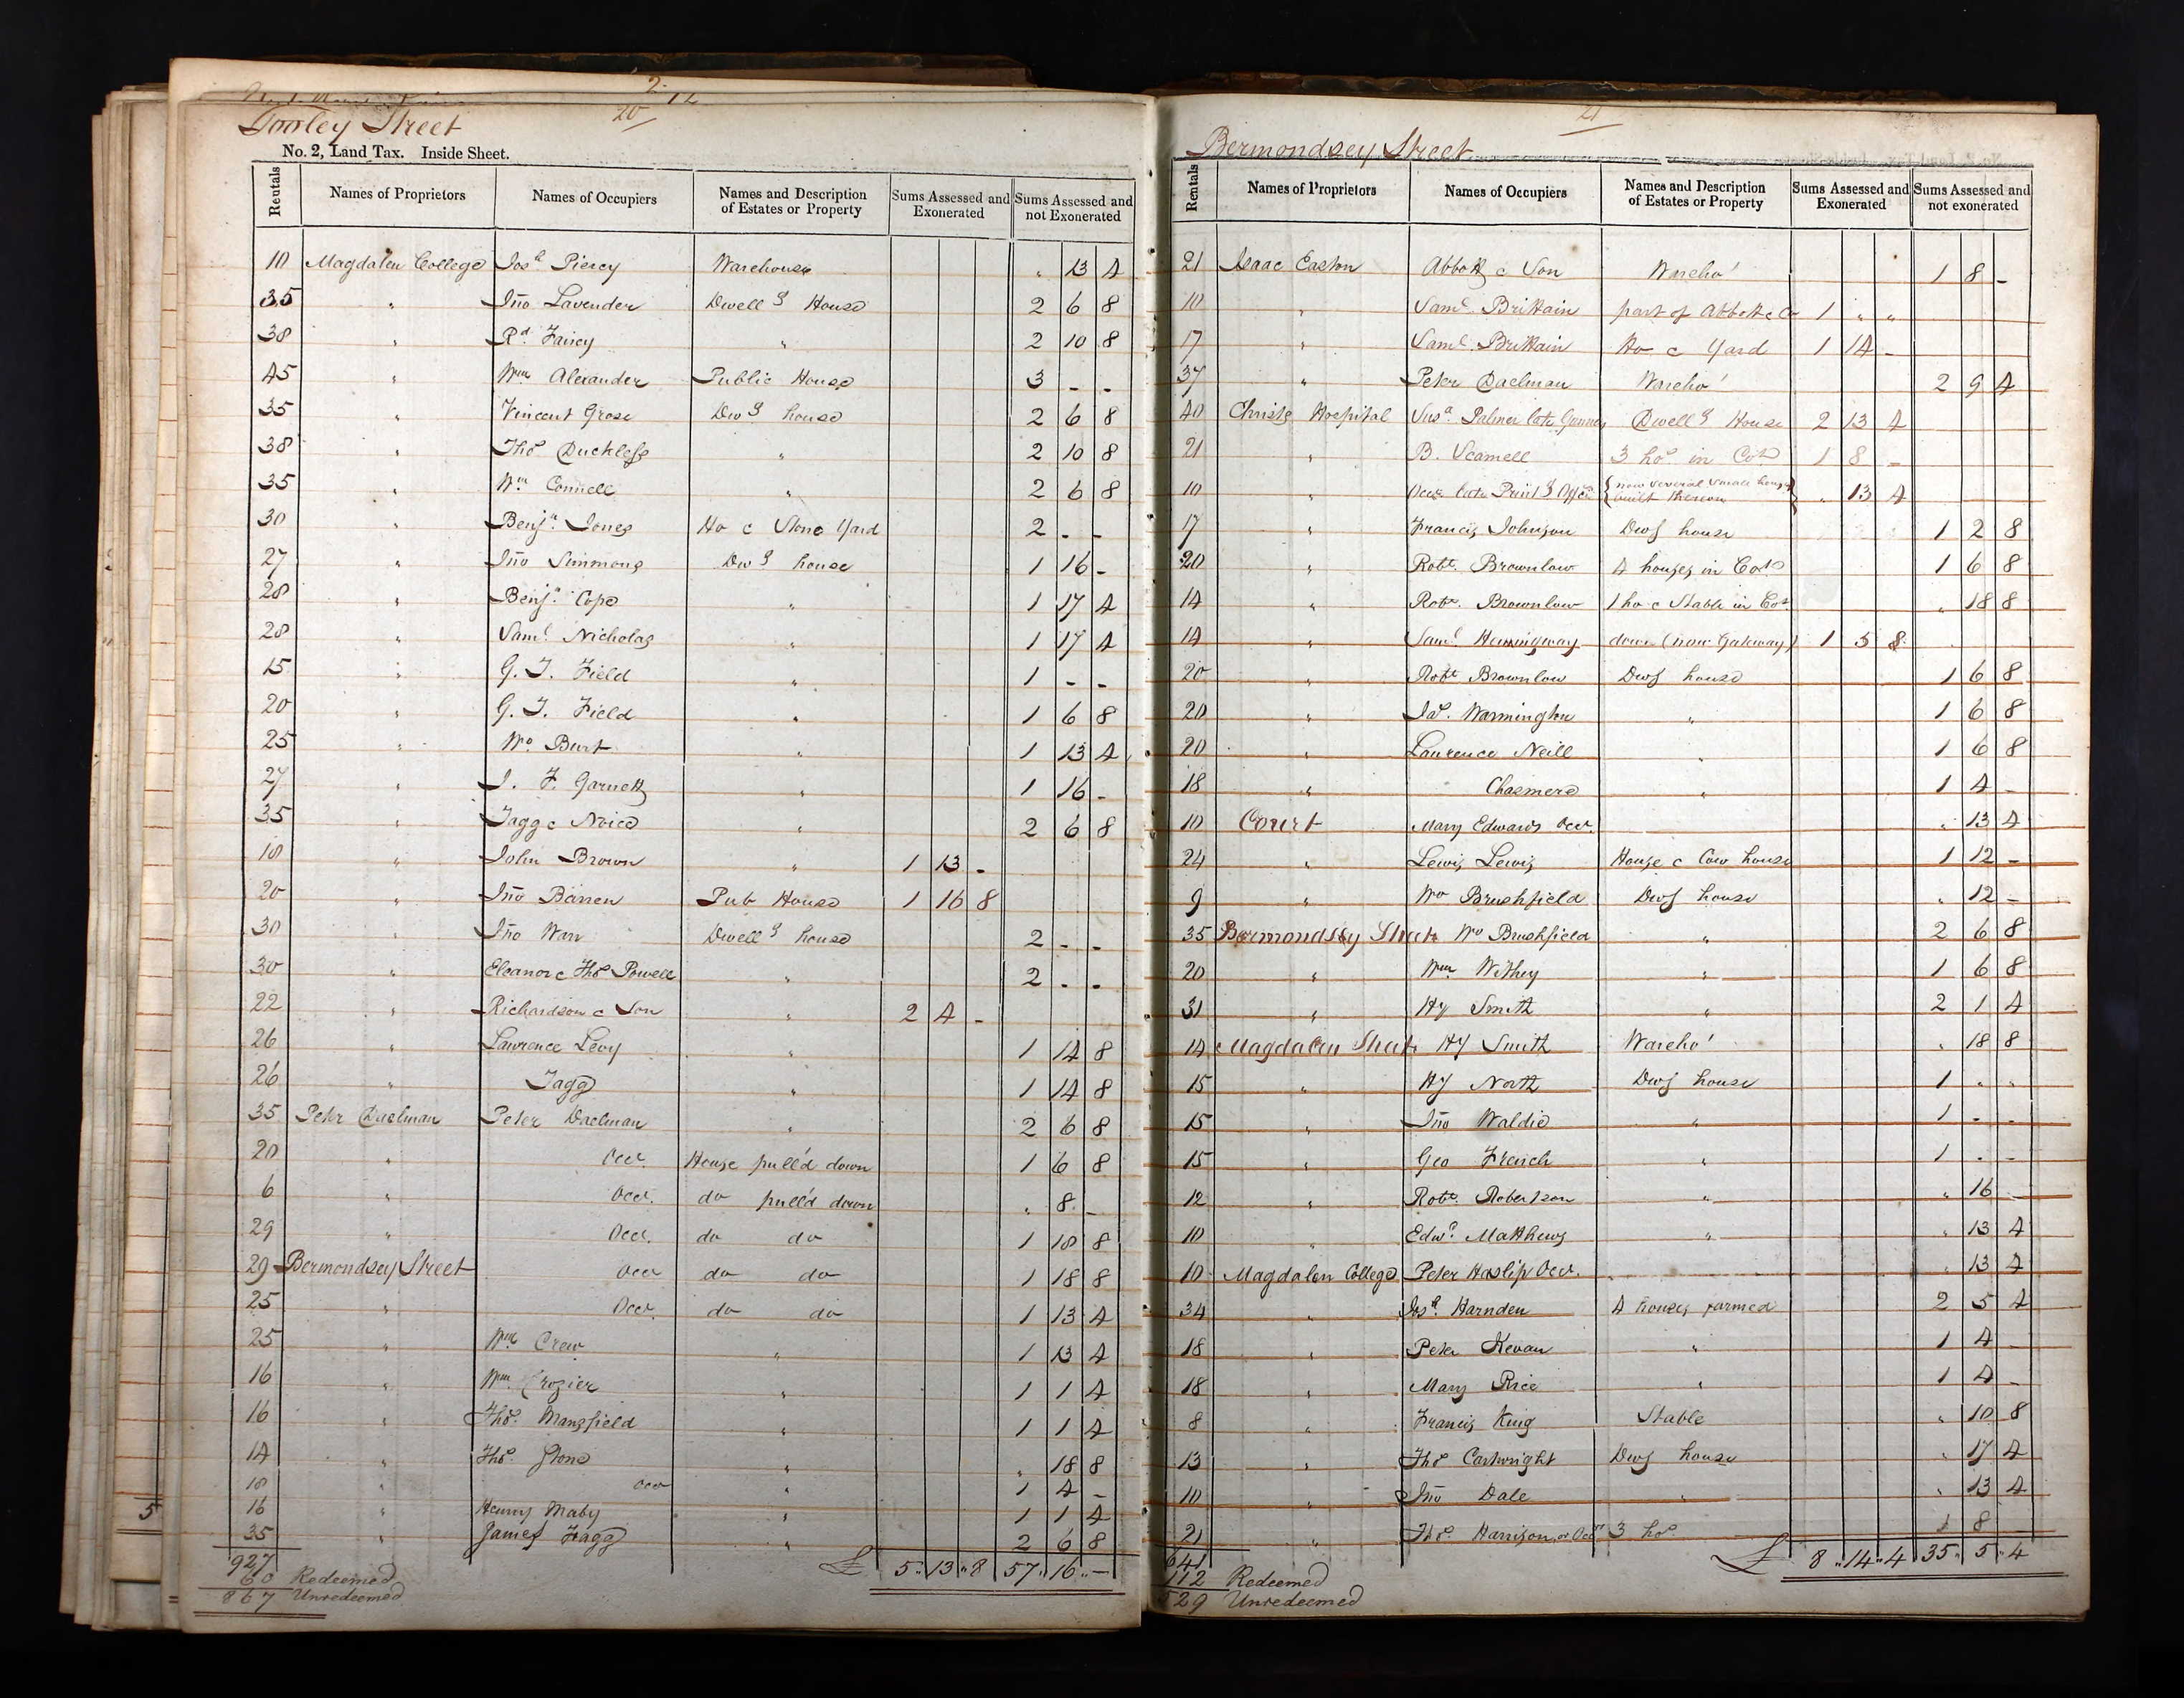 Peter Kevan 1836 land tax records showing 4 houses farmed